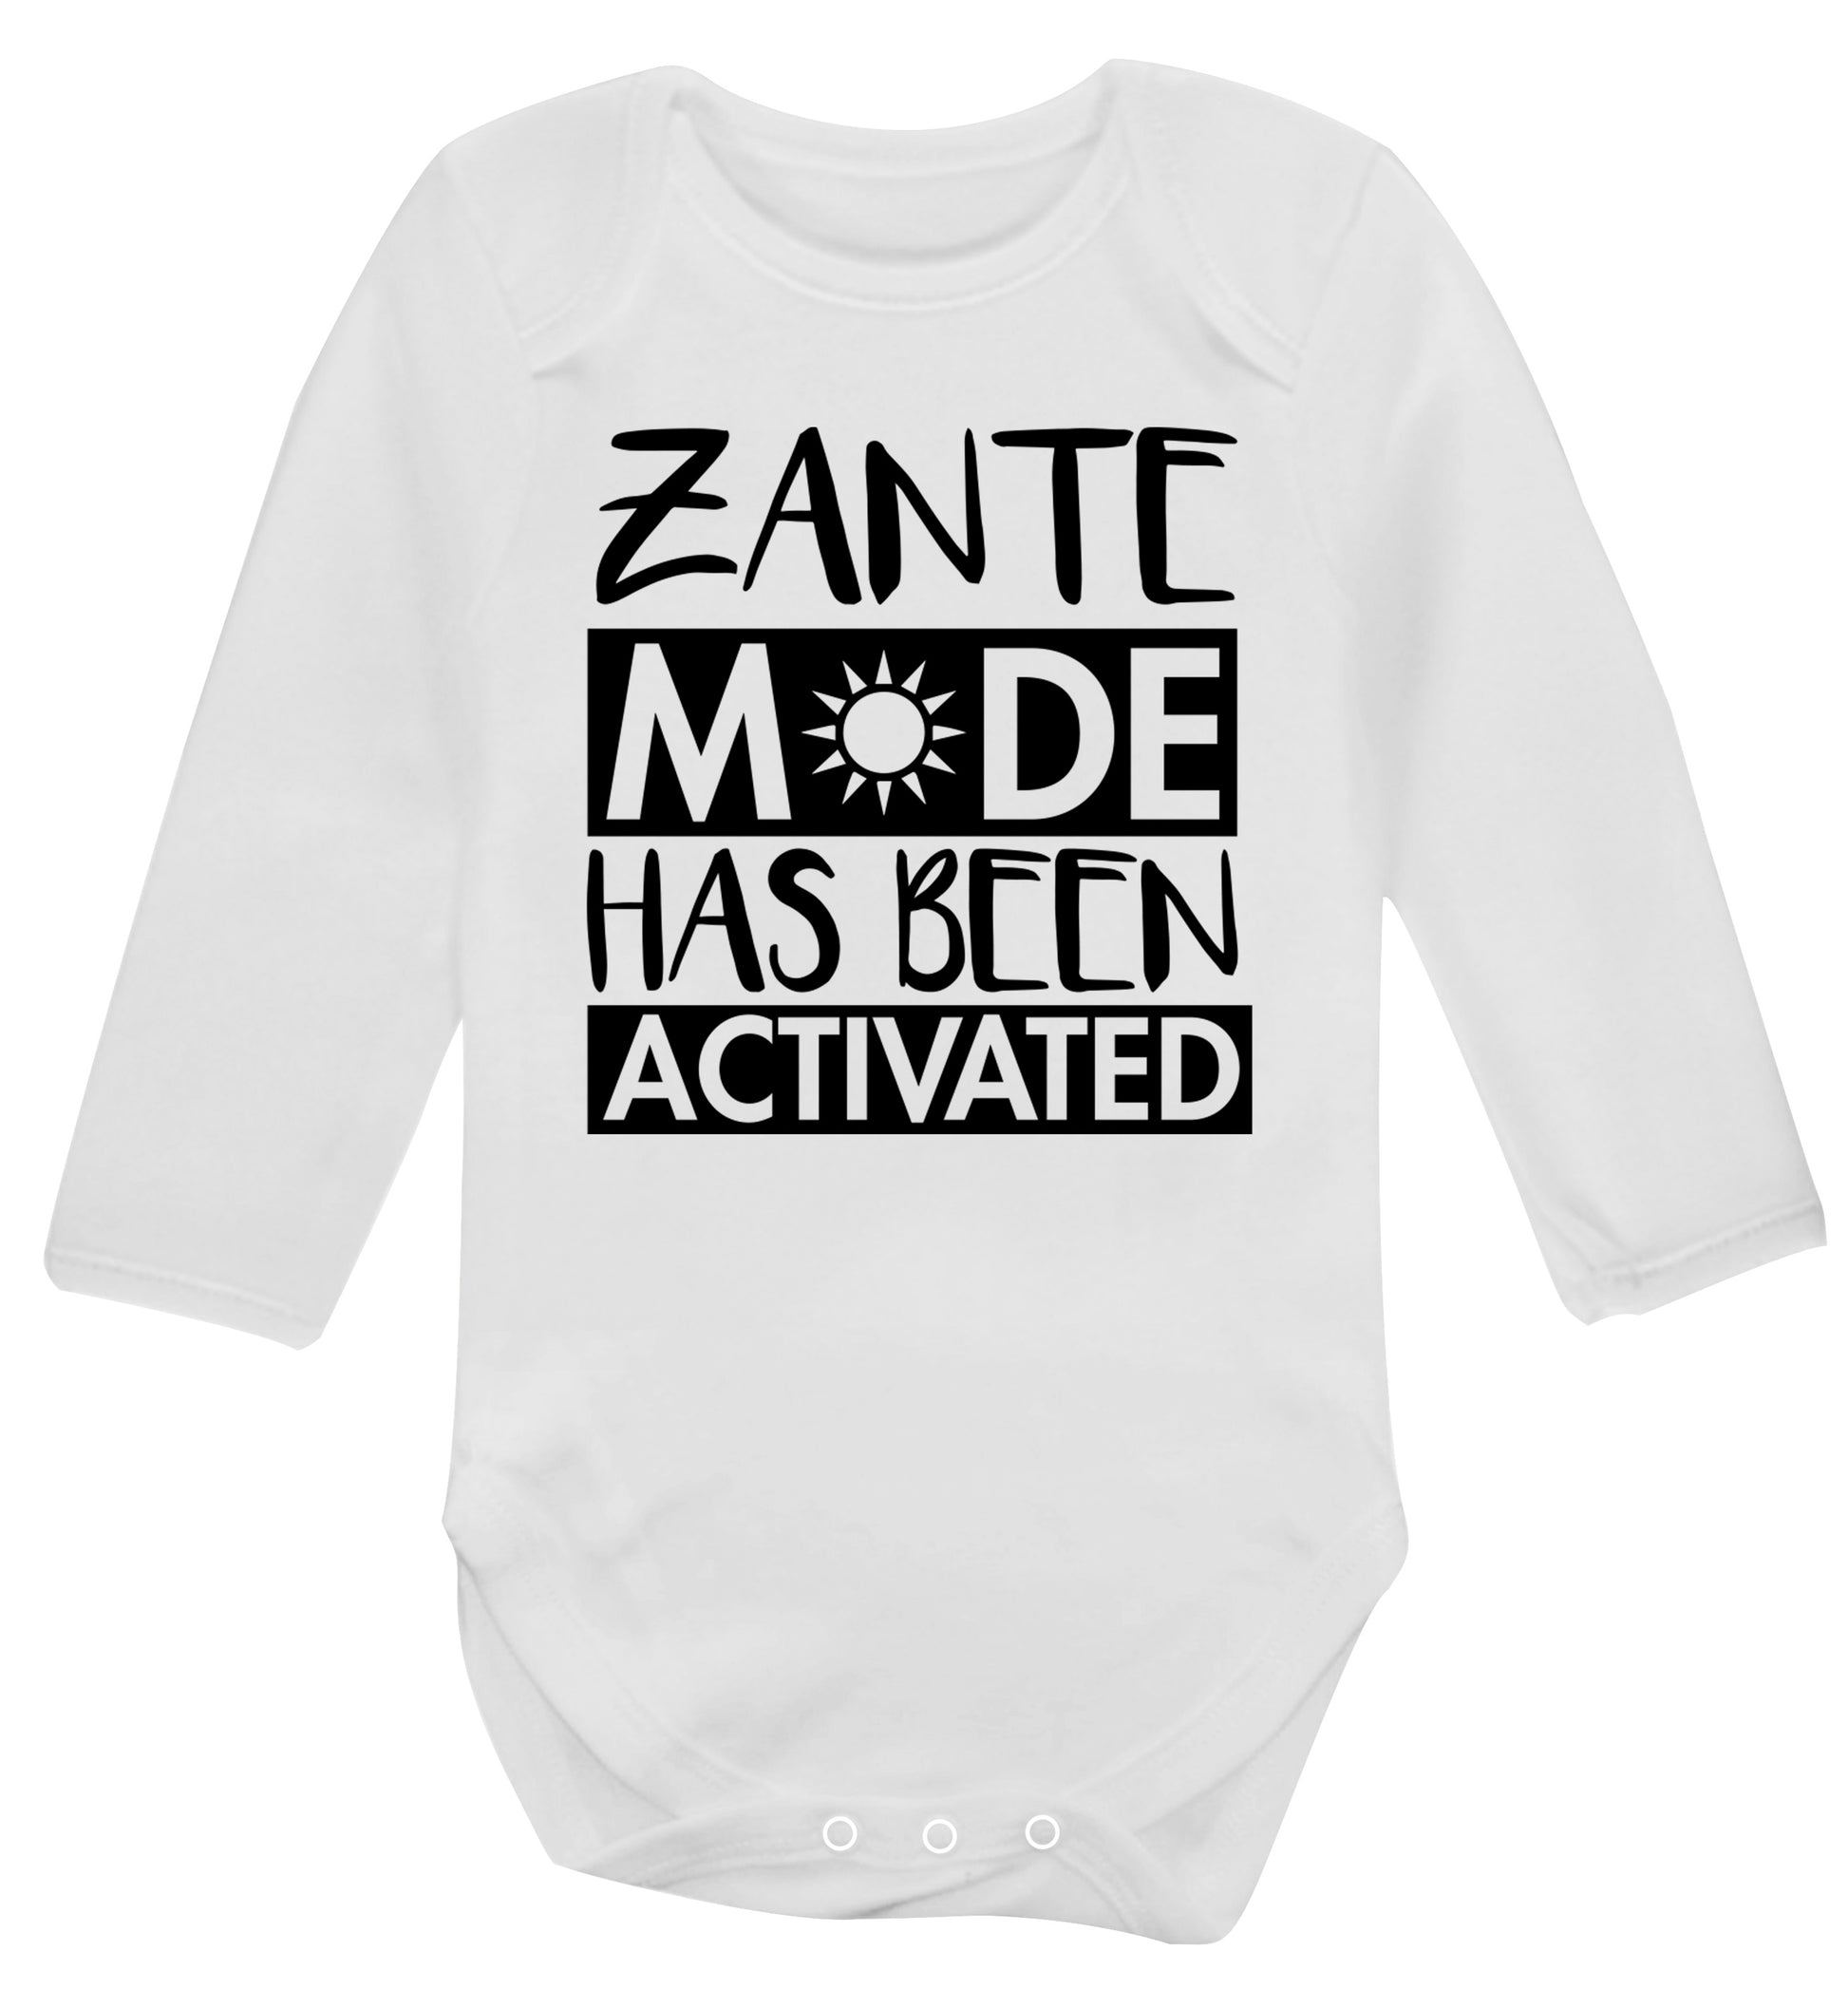 Zante mode has been activated Baby Vest long sleeved white 6-12 months